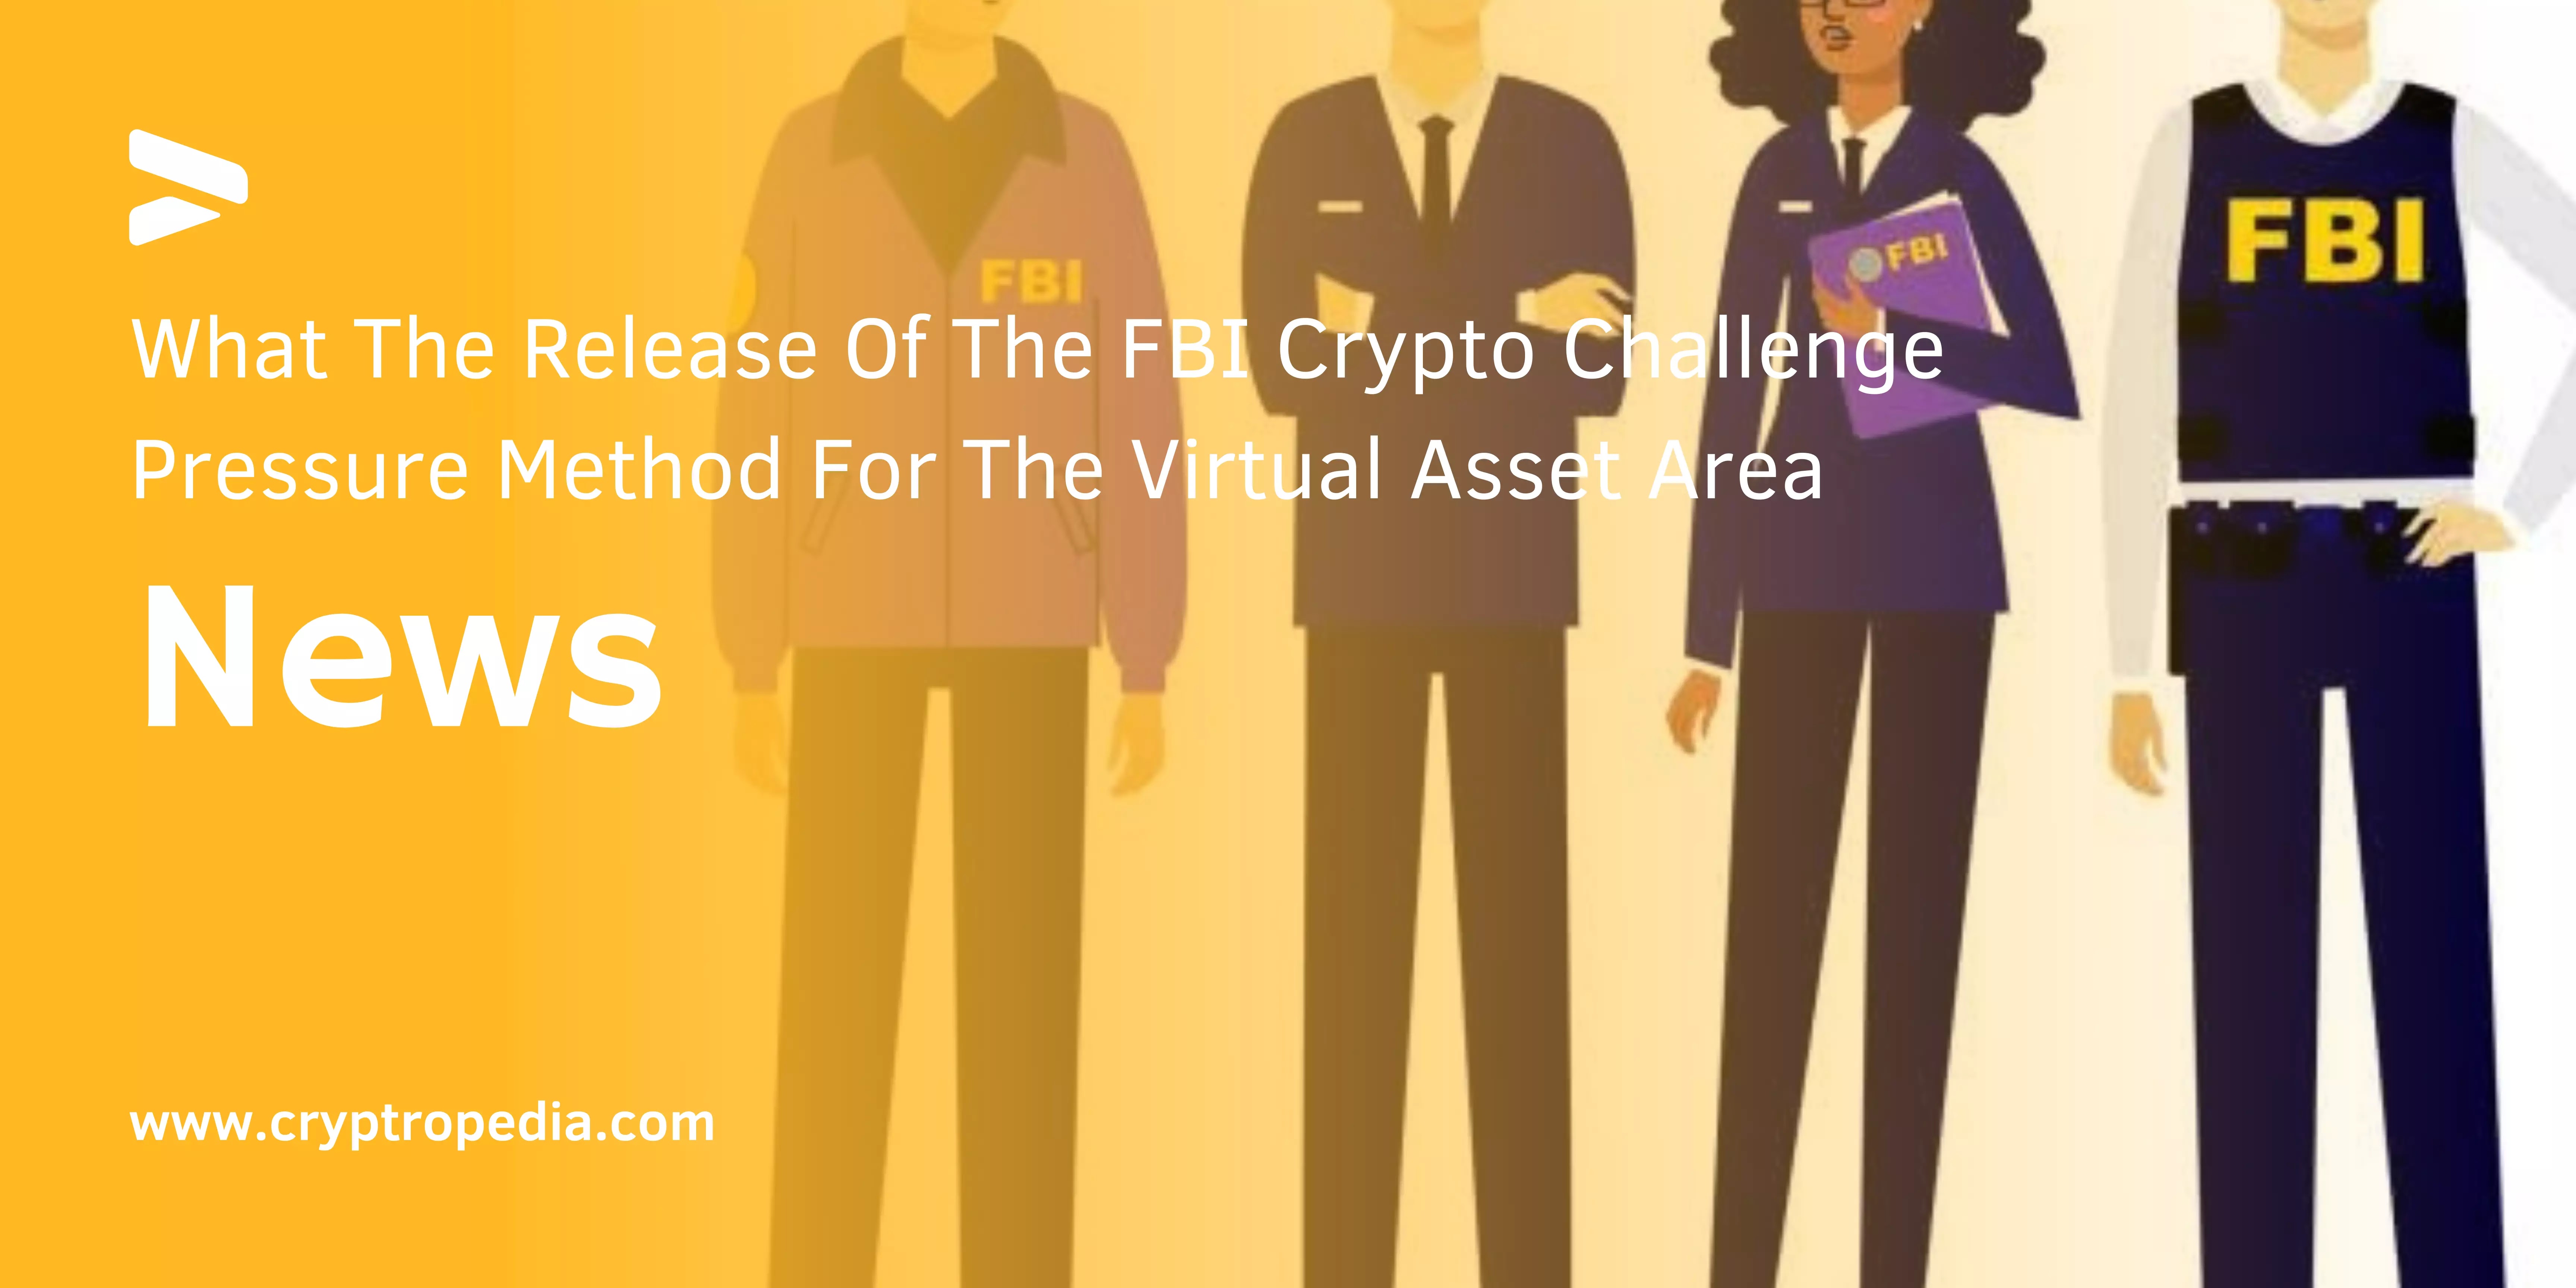 What The Release Of The FBI Crypto Challenge Pressure Method For The Virtual Asset Area